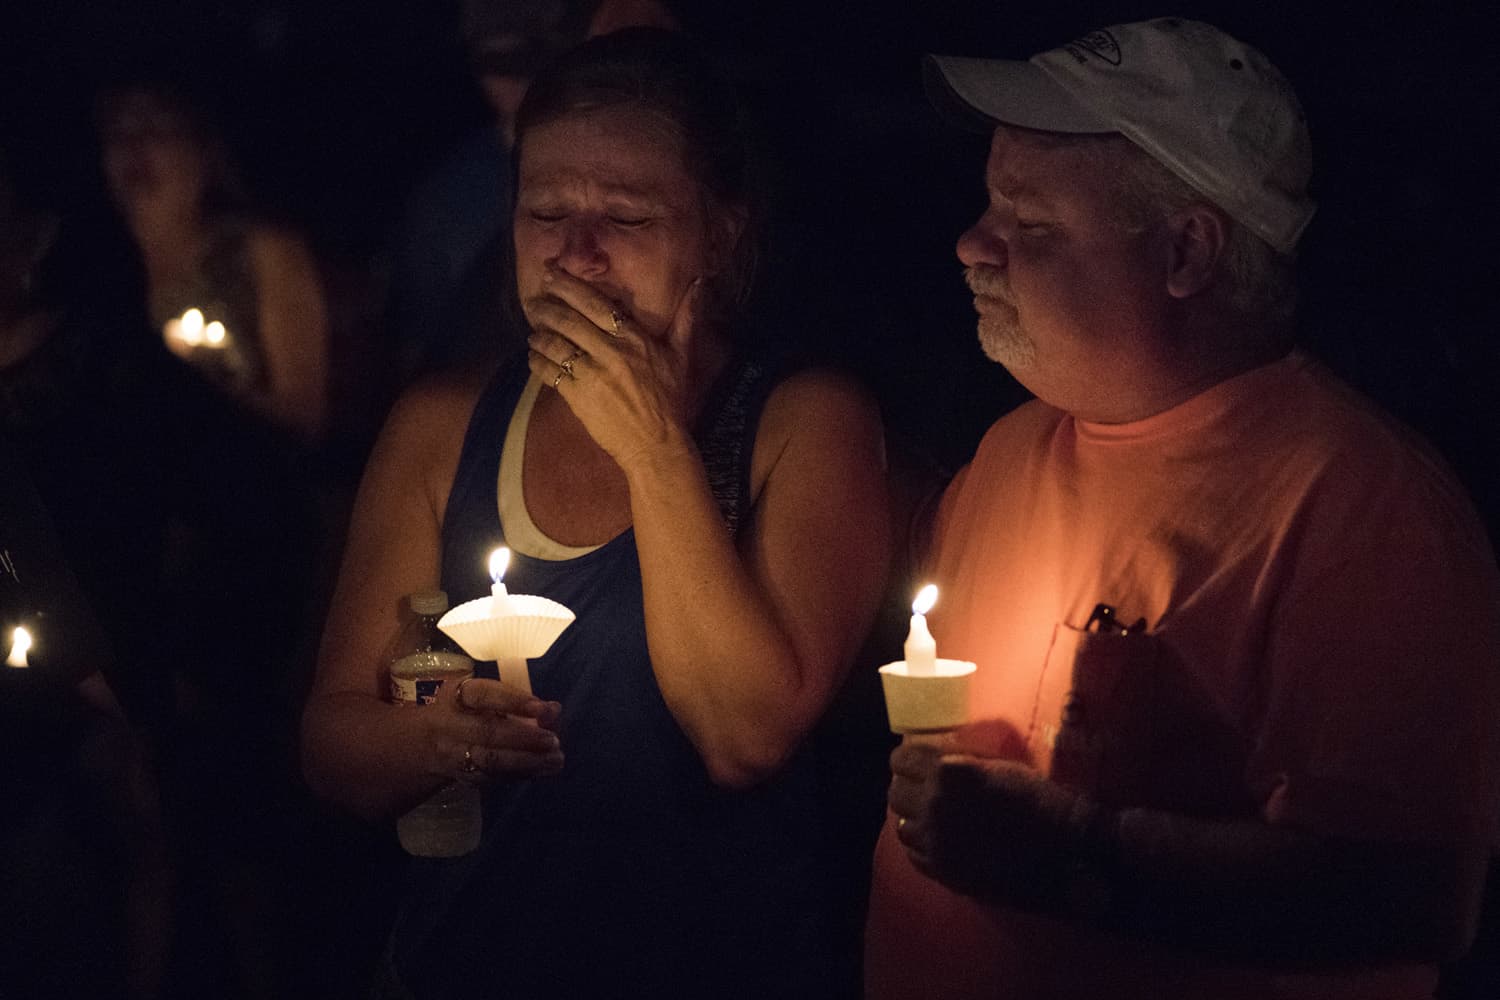 Mourners participate in a candlelight vigil for the victims of a fatal shooting at the First Baptist Church of Sutherland Springs (Darren Abate/AP)